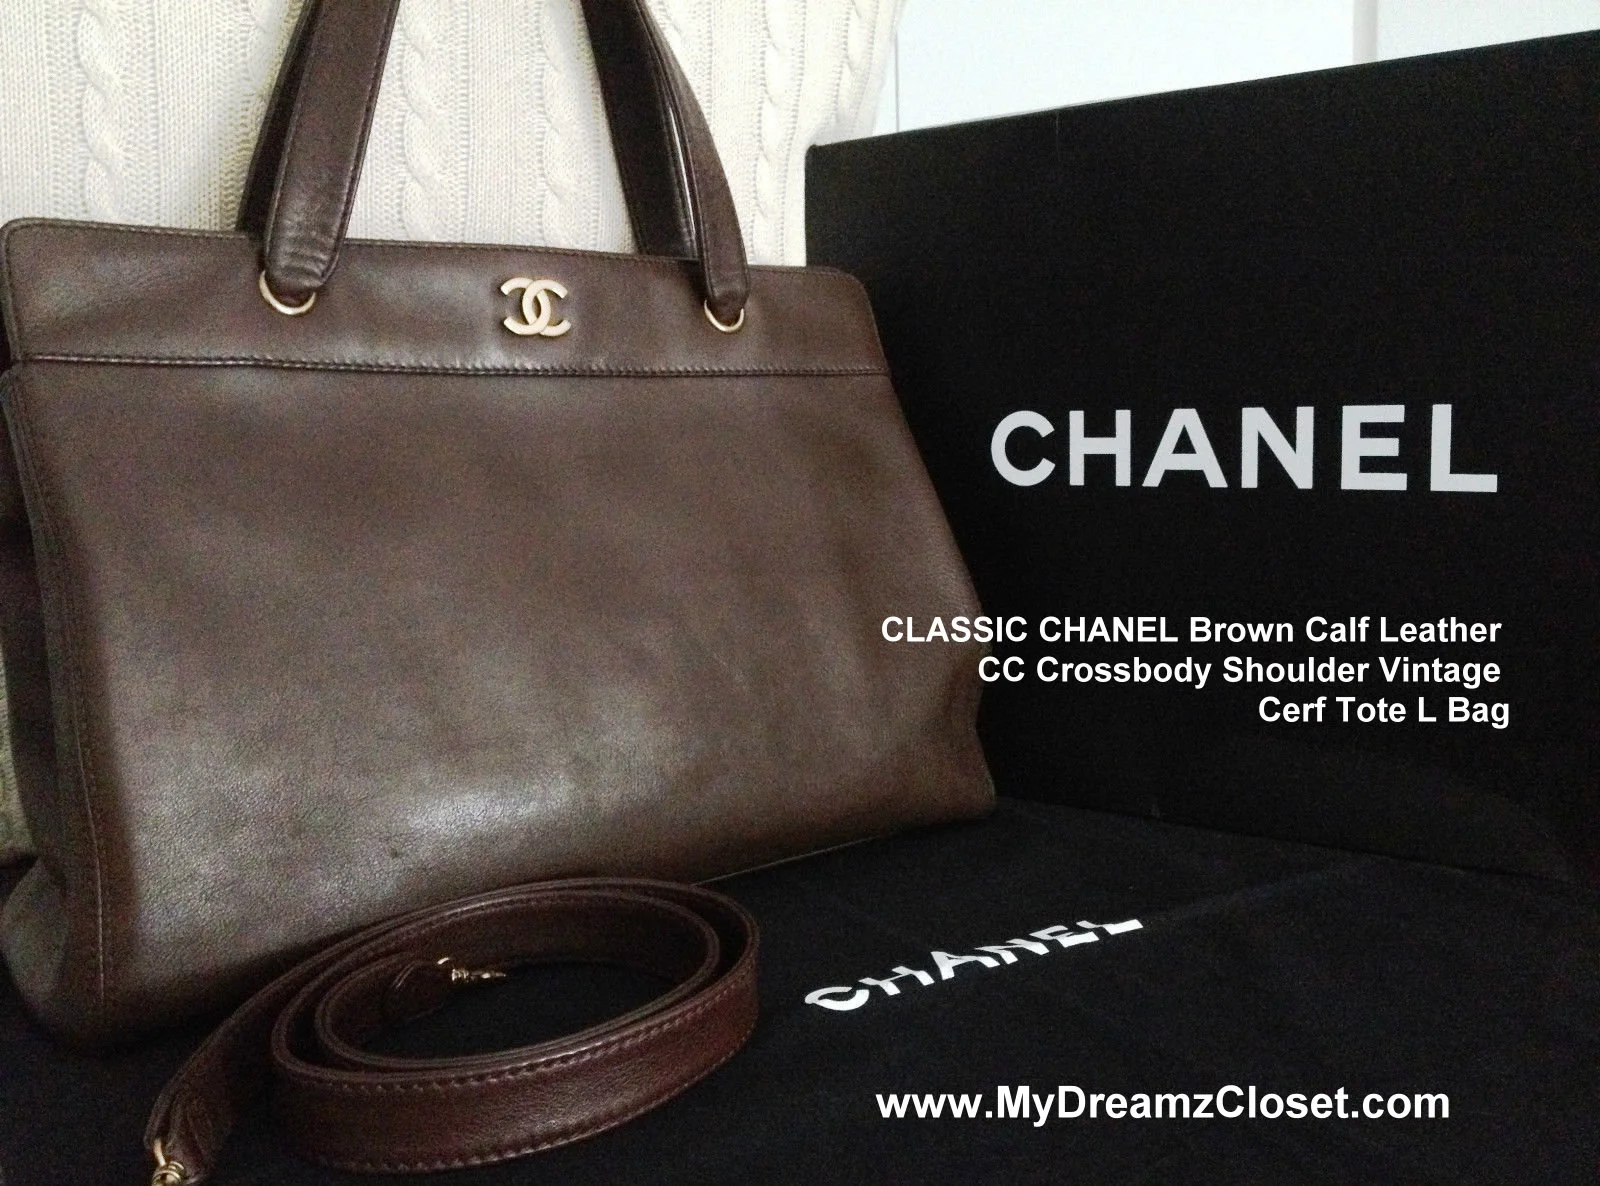 CLASSIC CHANEL Brown Calf Leather CC Crossbody Shoulder Vintage